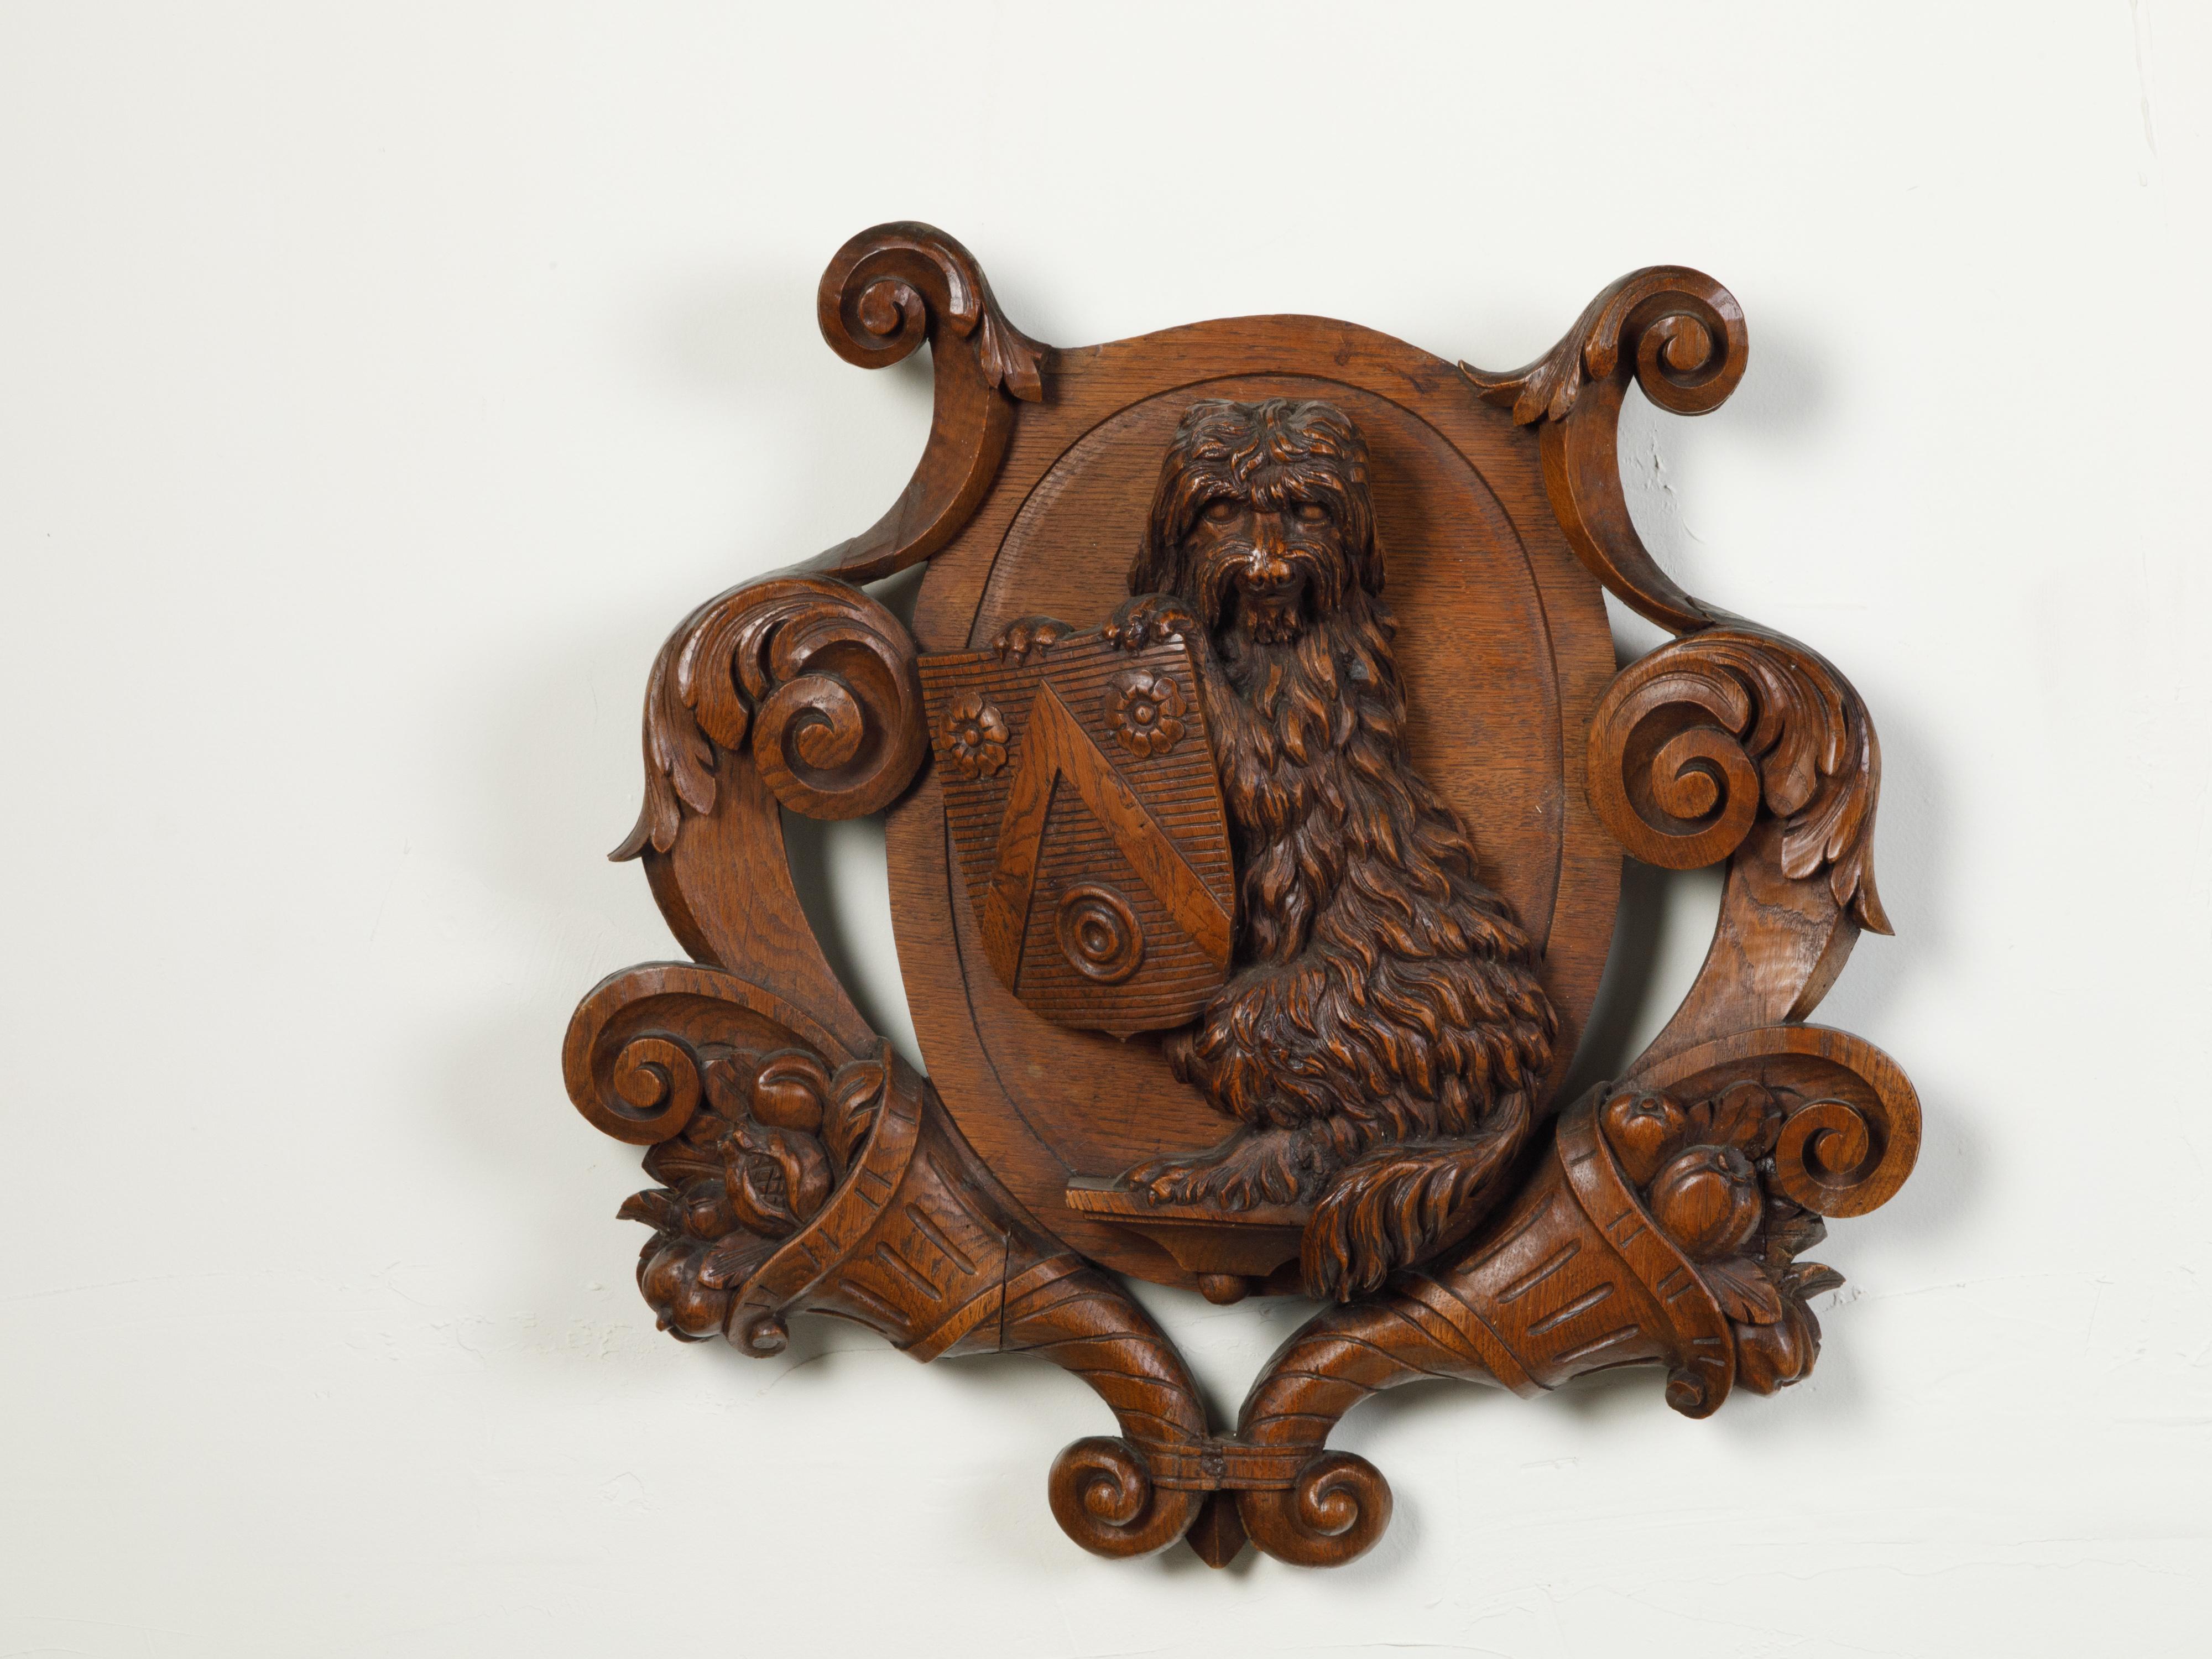 An English carved wooden wall fragment from the late 19th century, depicting a dog with a shield and cornucopia. Created in England during the last quarter of the 19th century, this wooden cartouche captures our attention with its skillful depiction